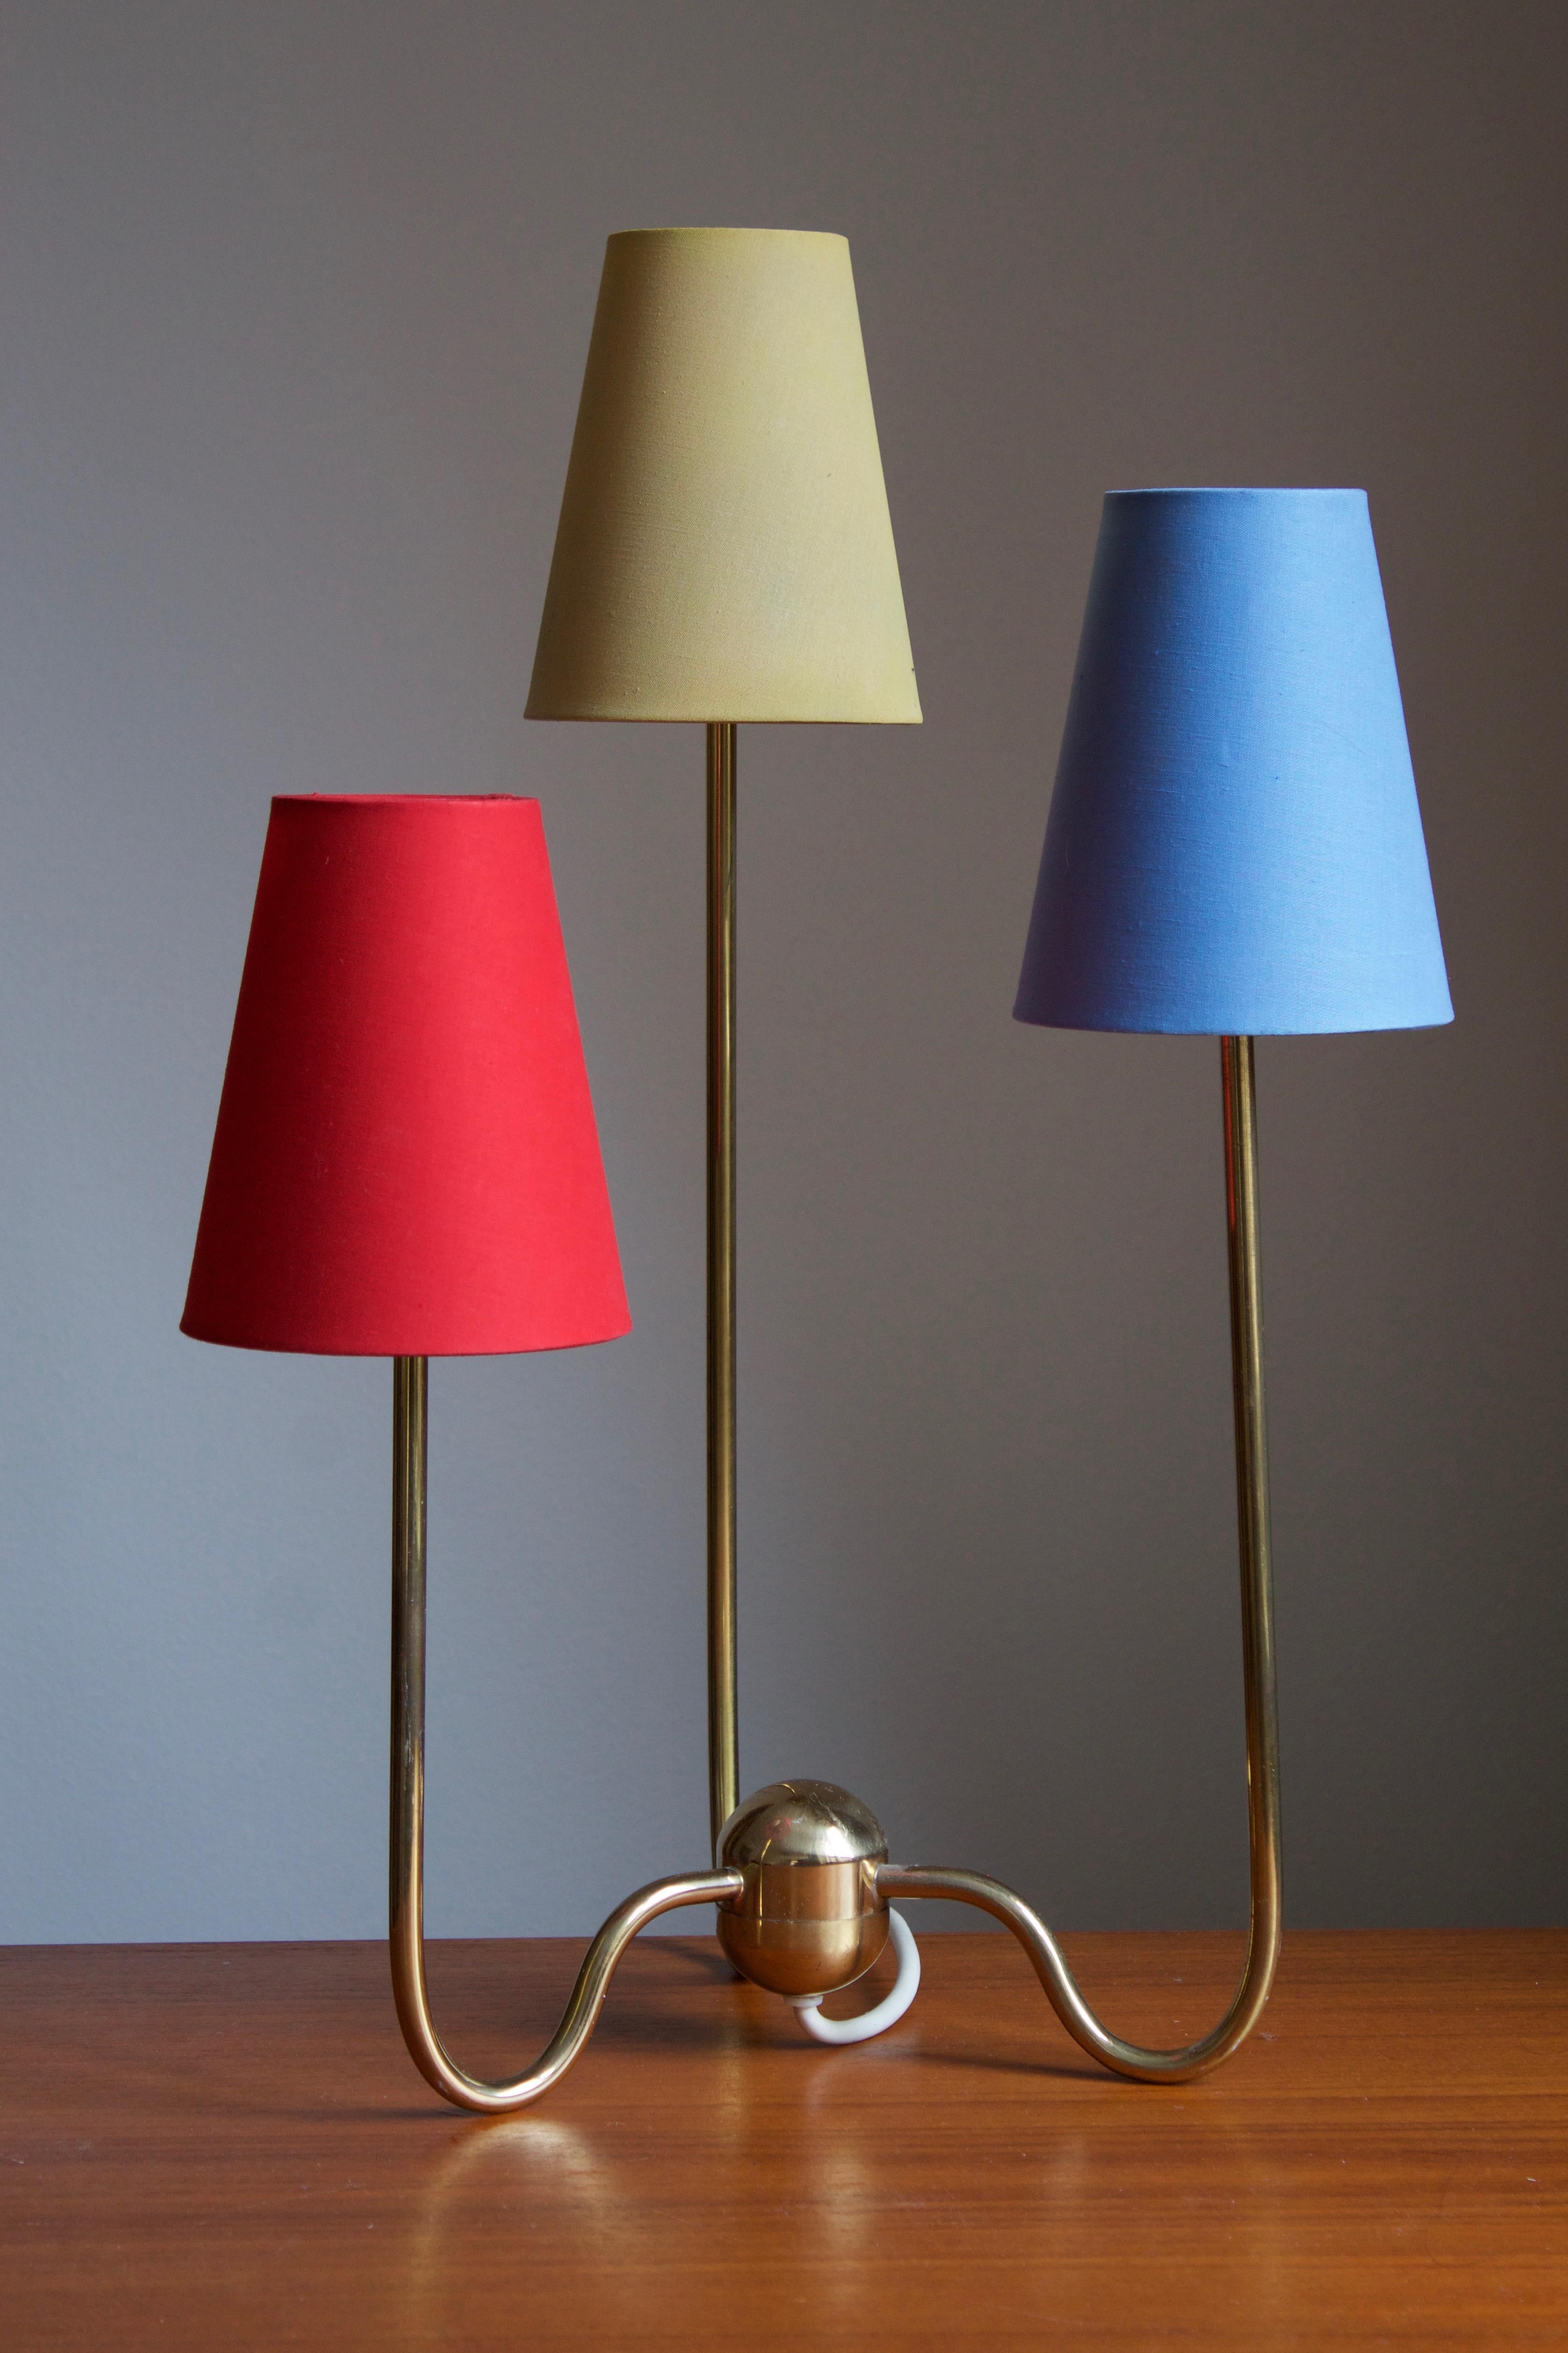 An example of Josef Franks 3-armed table lamp for Svenskt Tenn, Stockholm, Sweden. Vintage example produced the fourth quarter of 20th century.

Other lighting designers of the period include Paavo Tynell, Alvar Aalto, Serge Muille, and Angelo